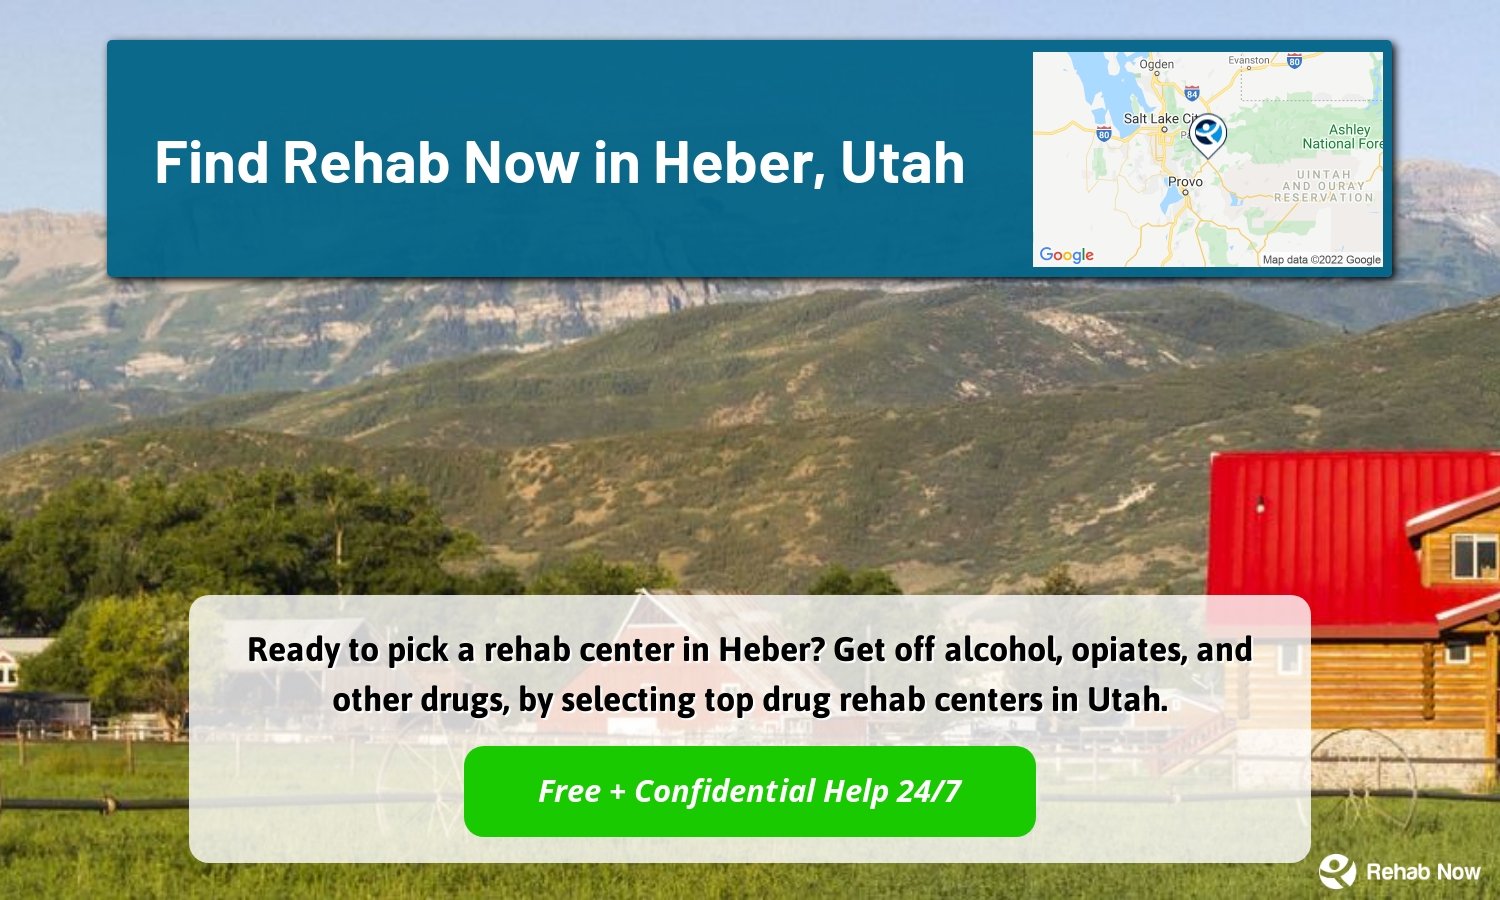 Ready to pick a rehab center in Heber? Get off alcohol, opiates, and other drugs, by selecting top drug rehab centers in Utah.